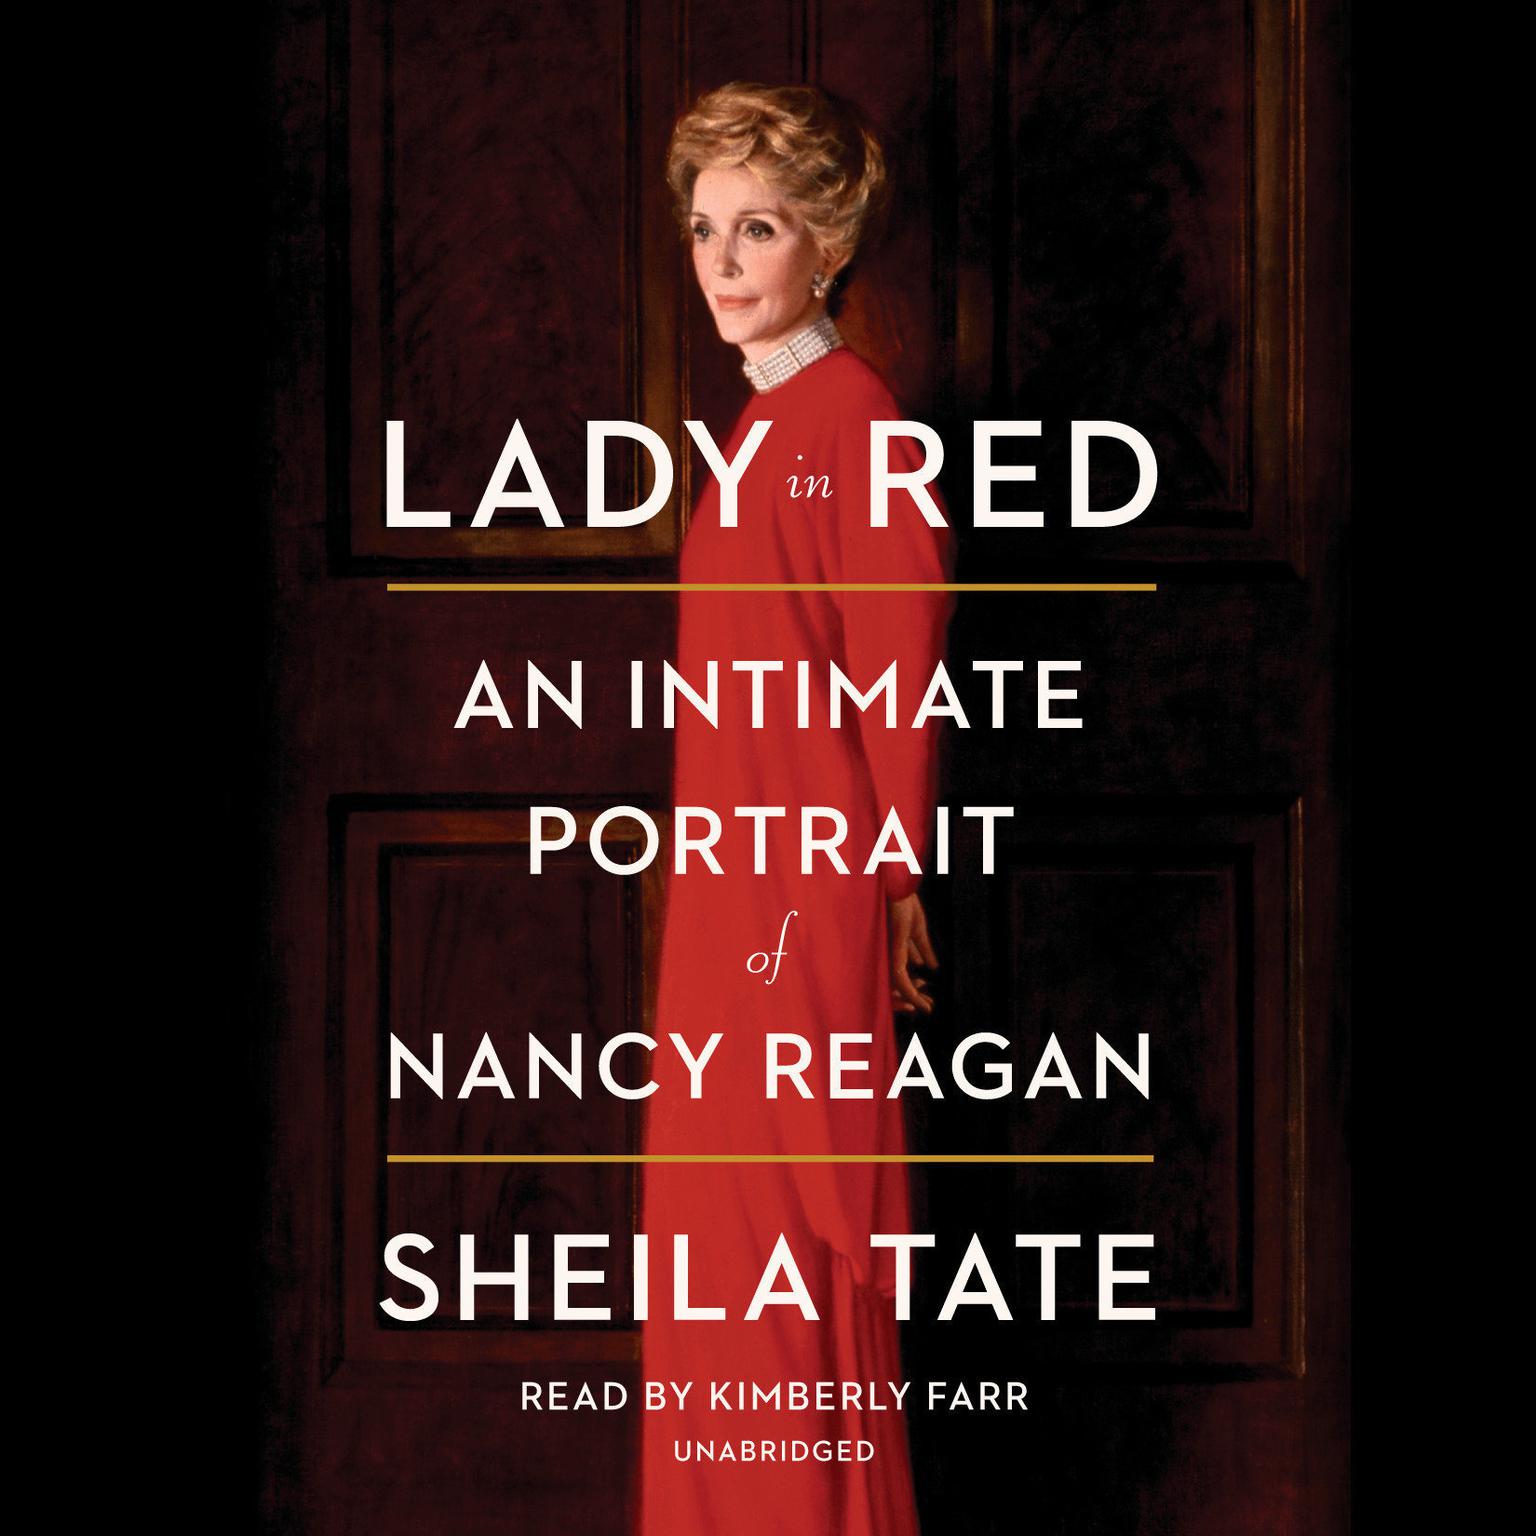 Lady in Red: An Intimate Portrait of Nancy Reagan Audiobook, by Sheila Tate